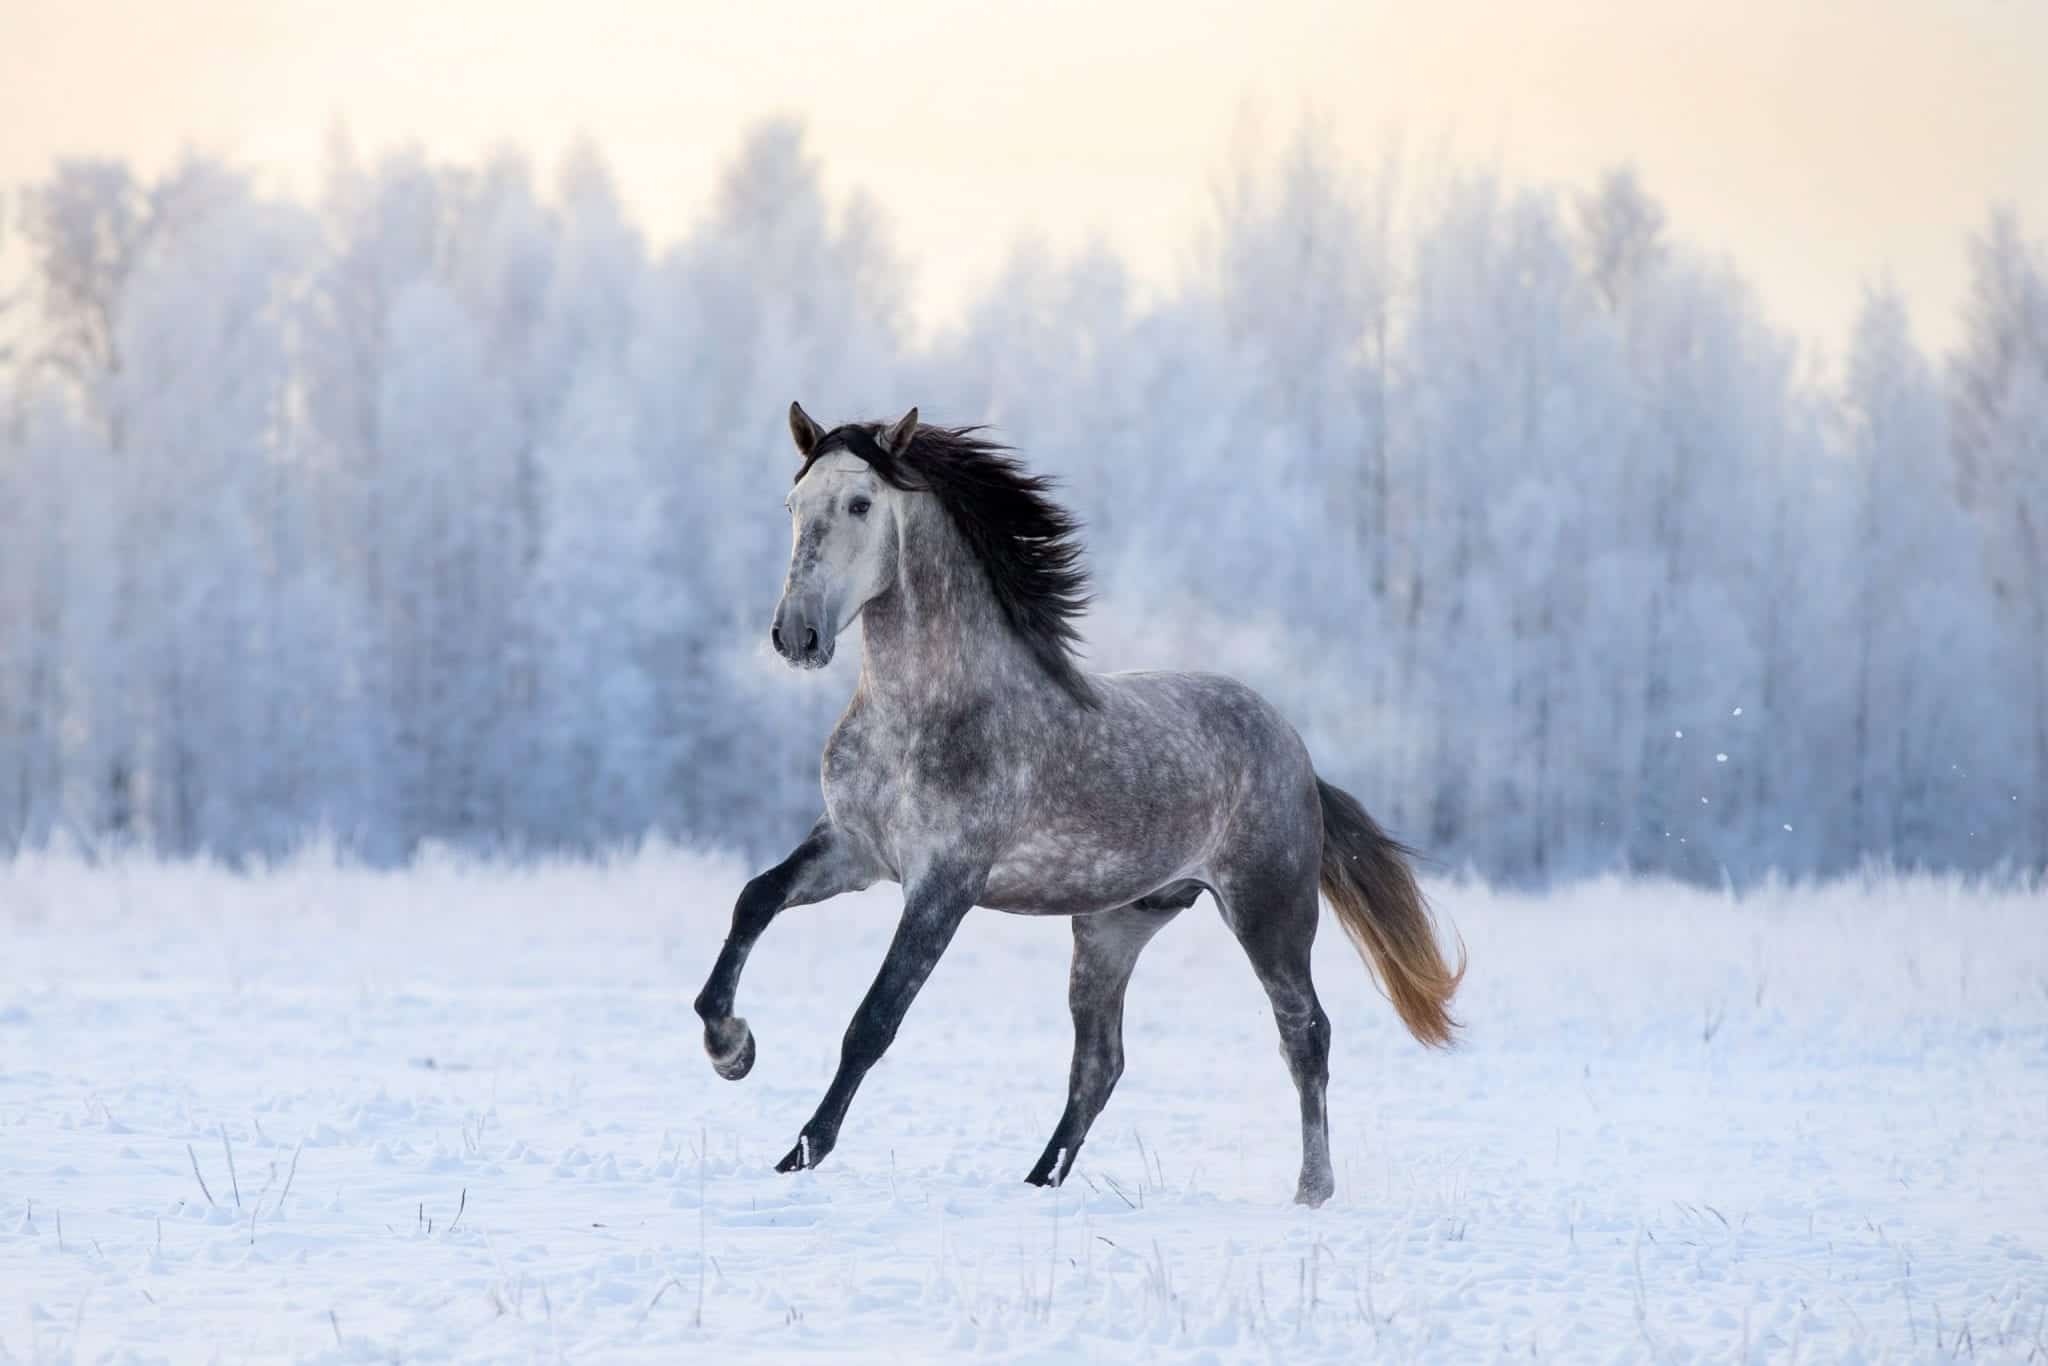 Winter hoof care, Horses in snow and ice, Preventing slips, Equine safety, 2050x1370 HD Desktop